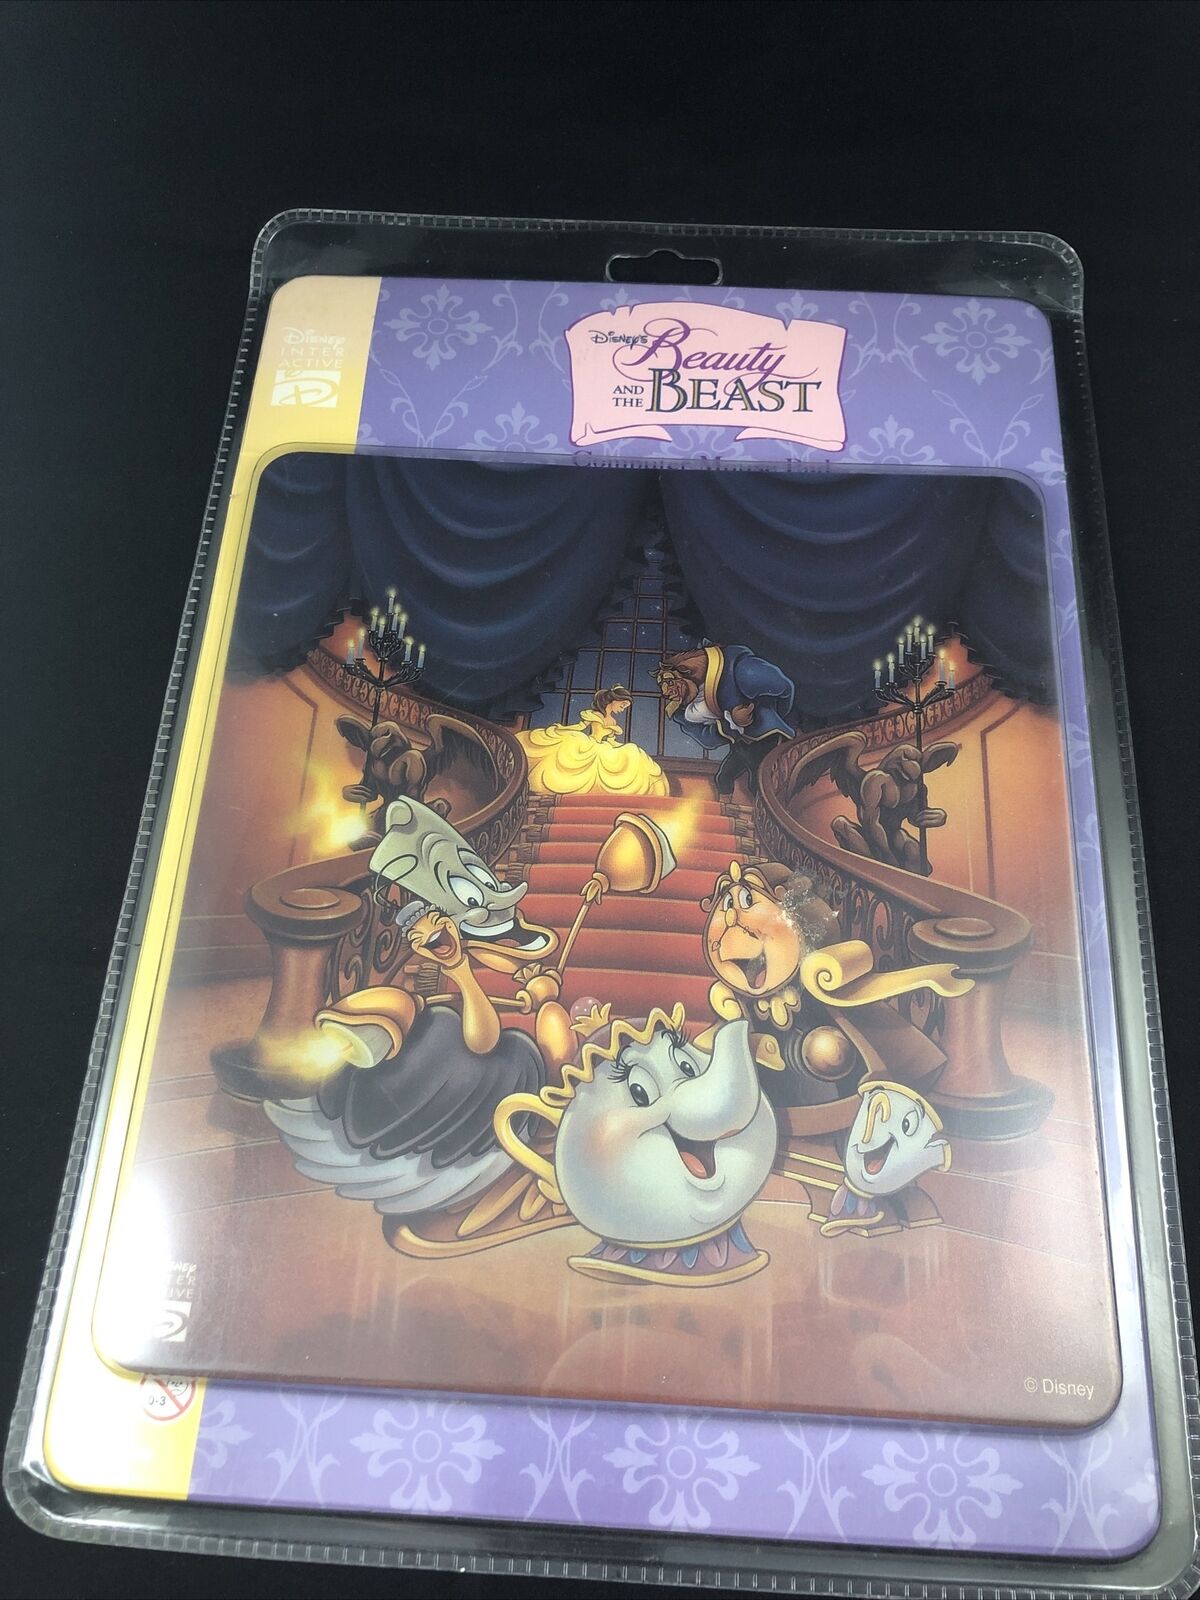 Disney Interactive Mouse pad Beauty And The Beast Vintage